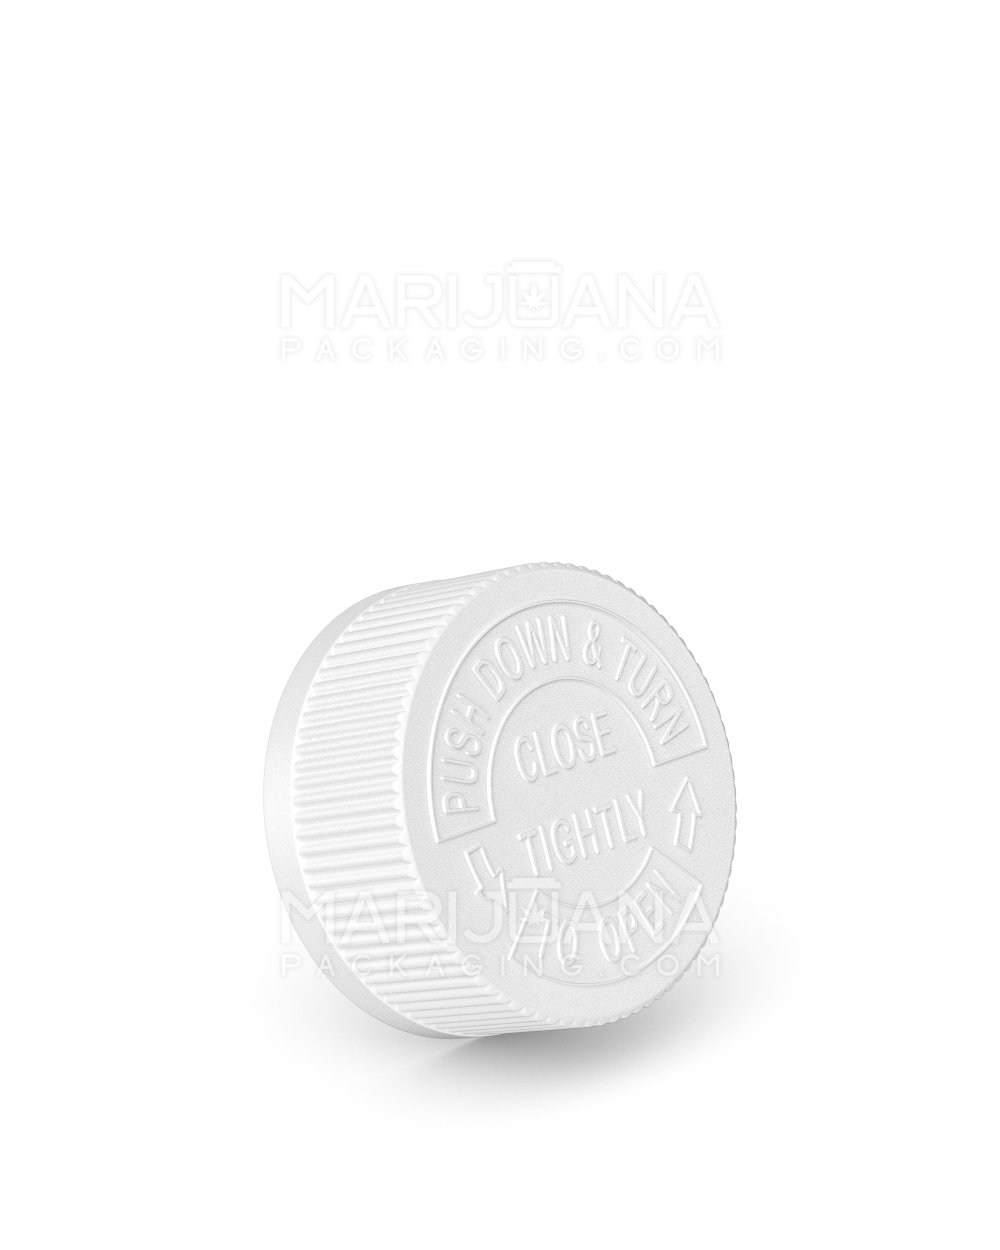 Child Resistant | Ribbed Push Down & Turn Plastic Caps | 33mm - Semi Gloss White - 252 Count - 1